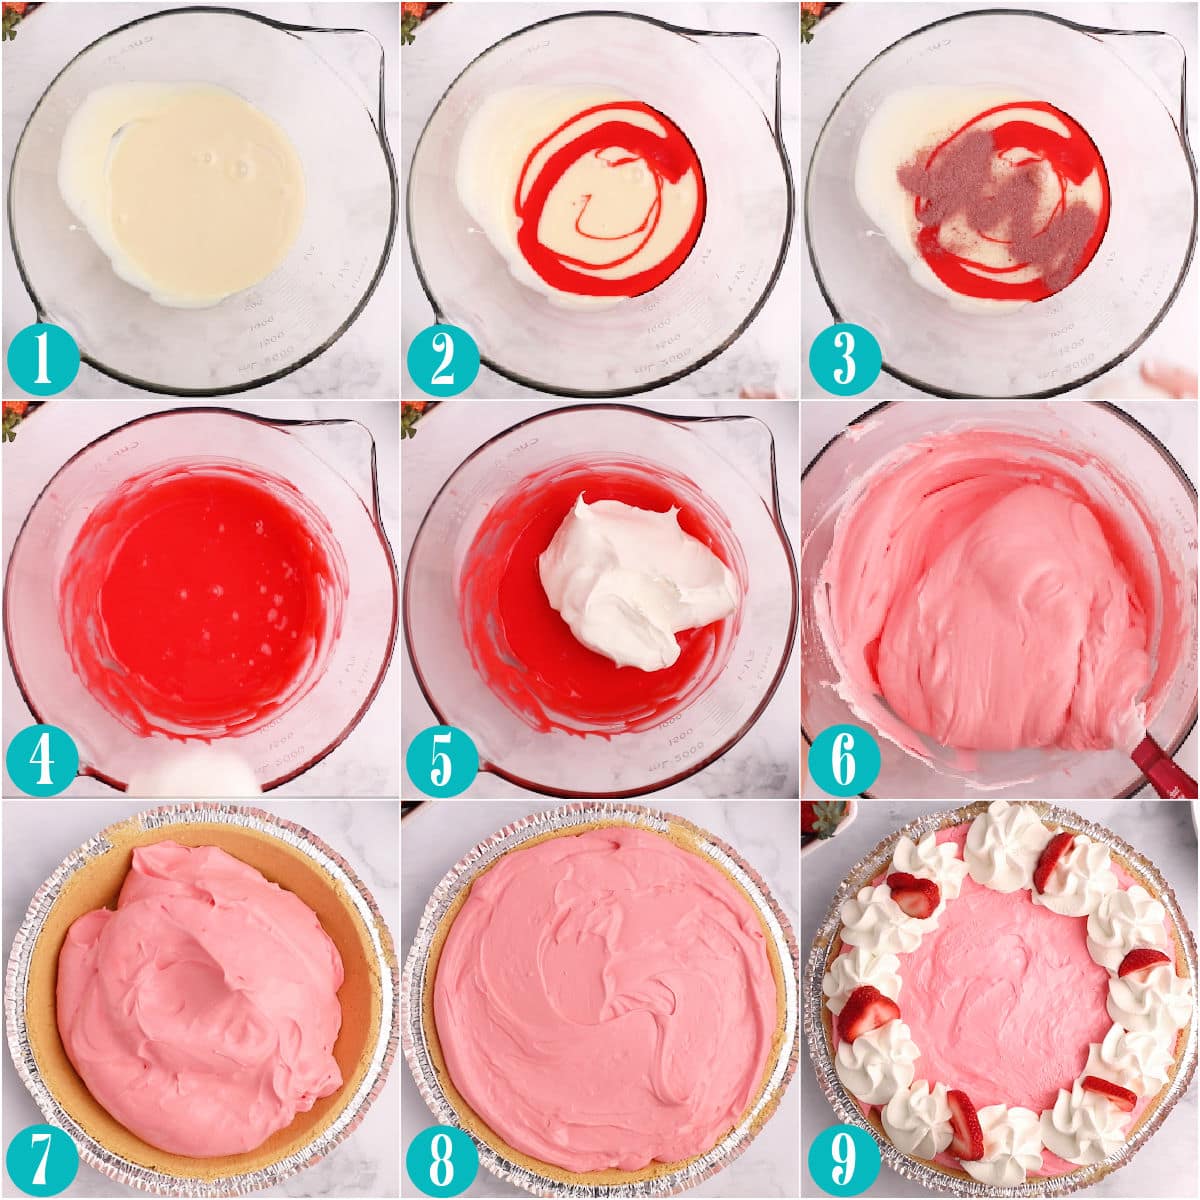 nine image collage showing how to make a kool aid pie step by step.